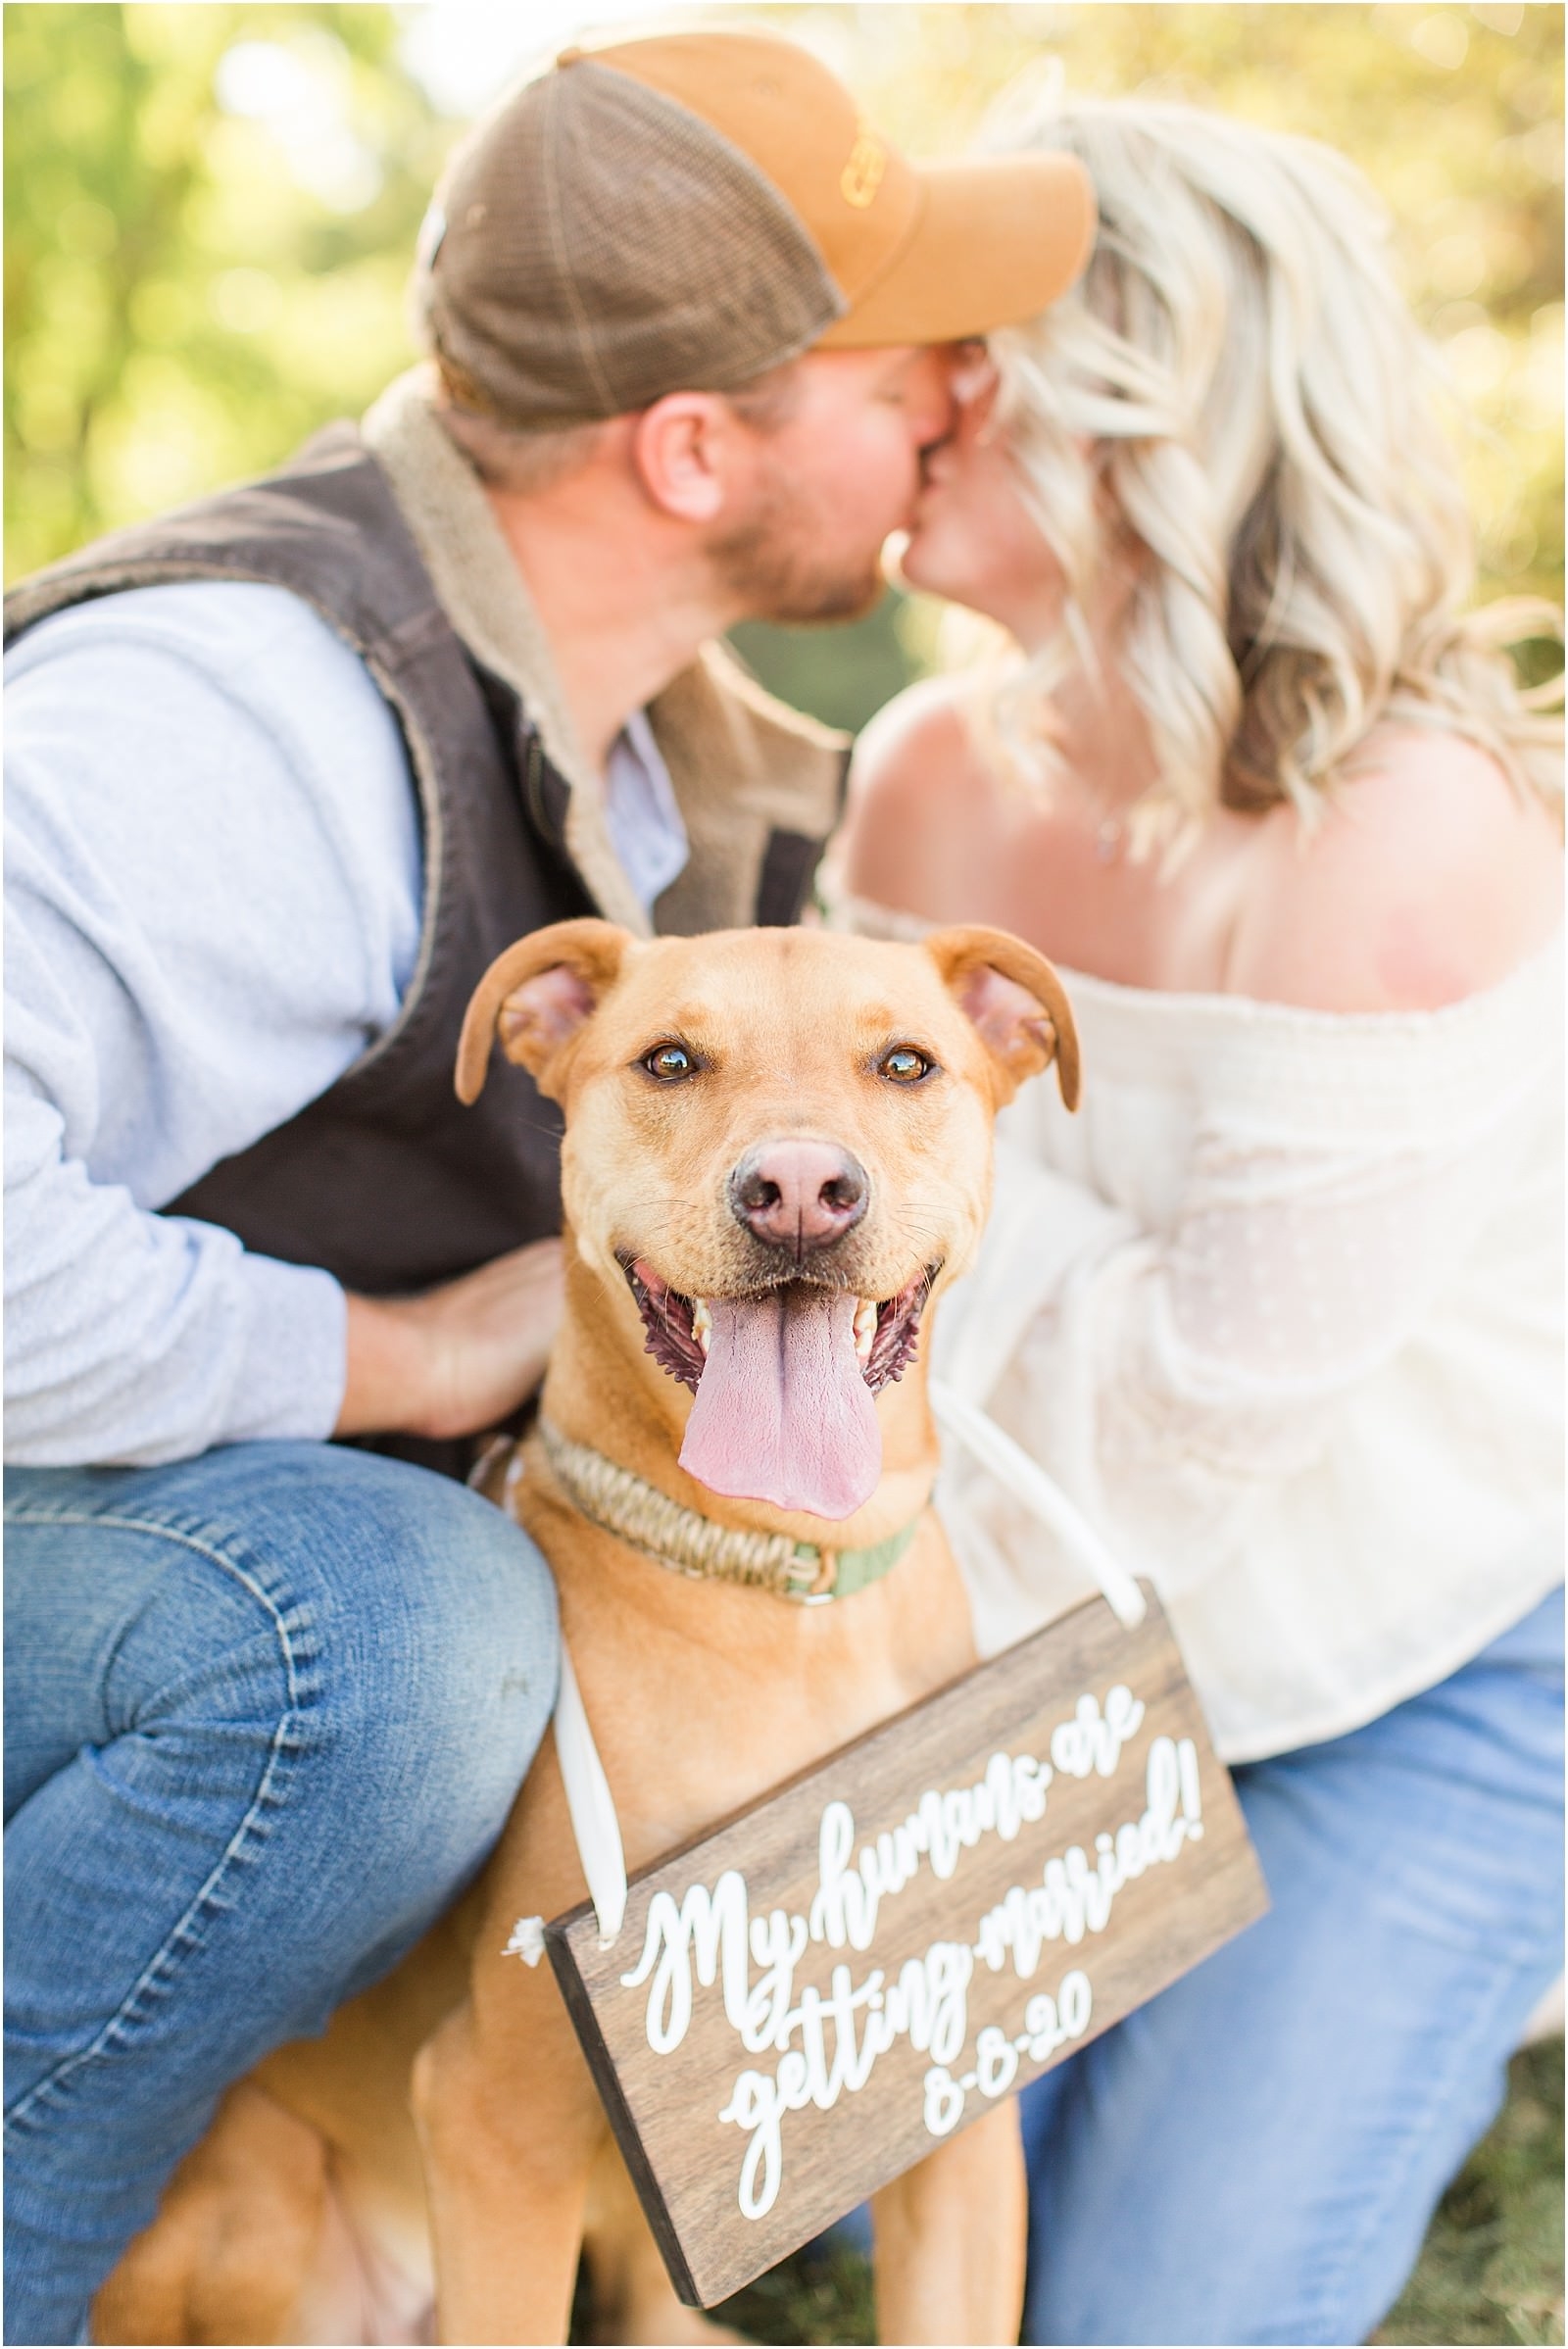 Evansville Wedding Photographers | Tips for Including Pets on Wedding Days | Bret and Brandie0006.jpg